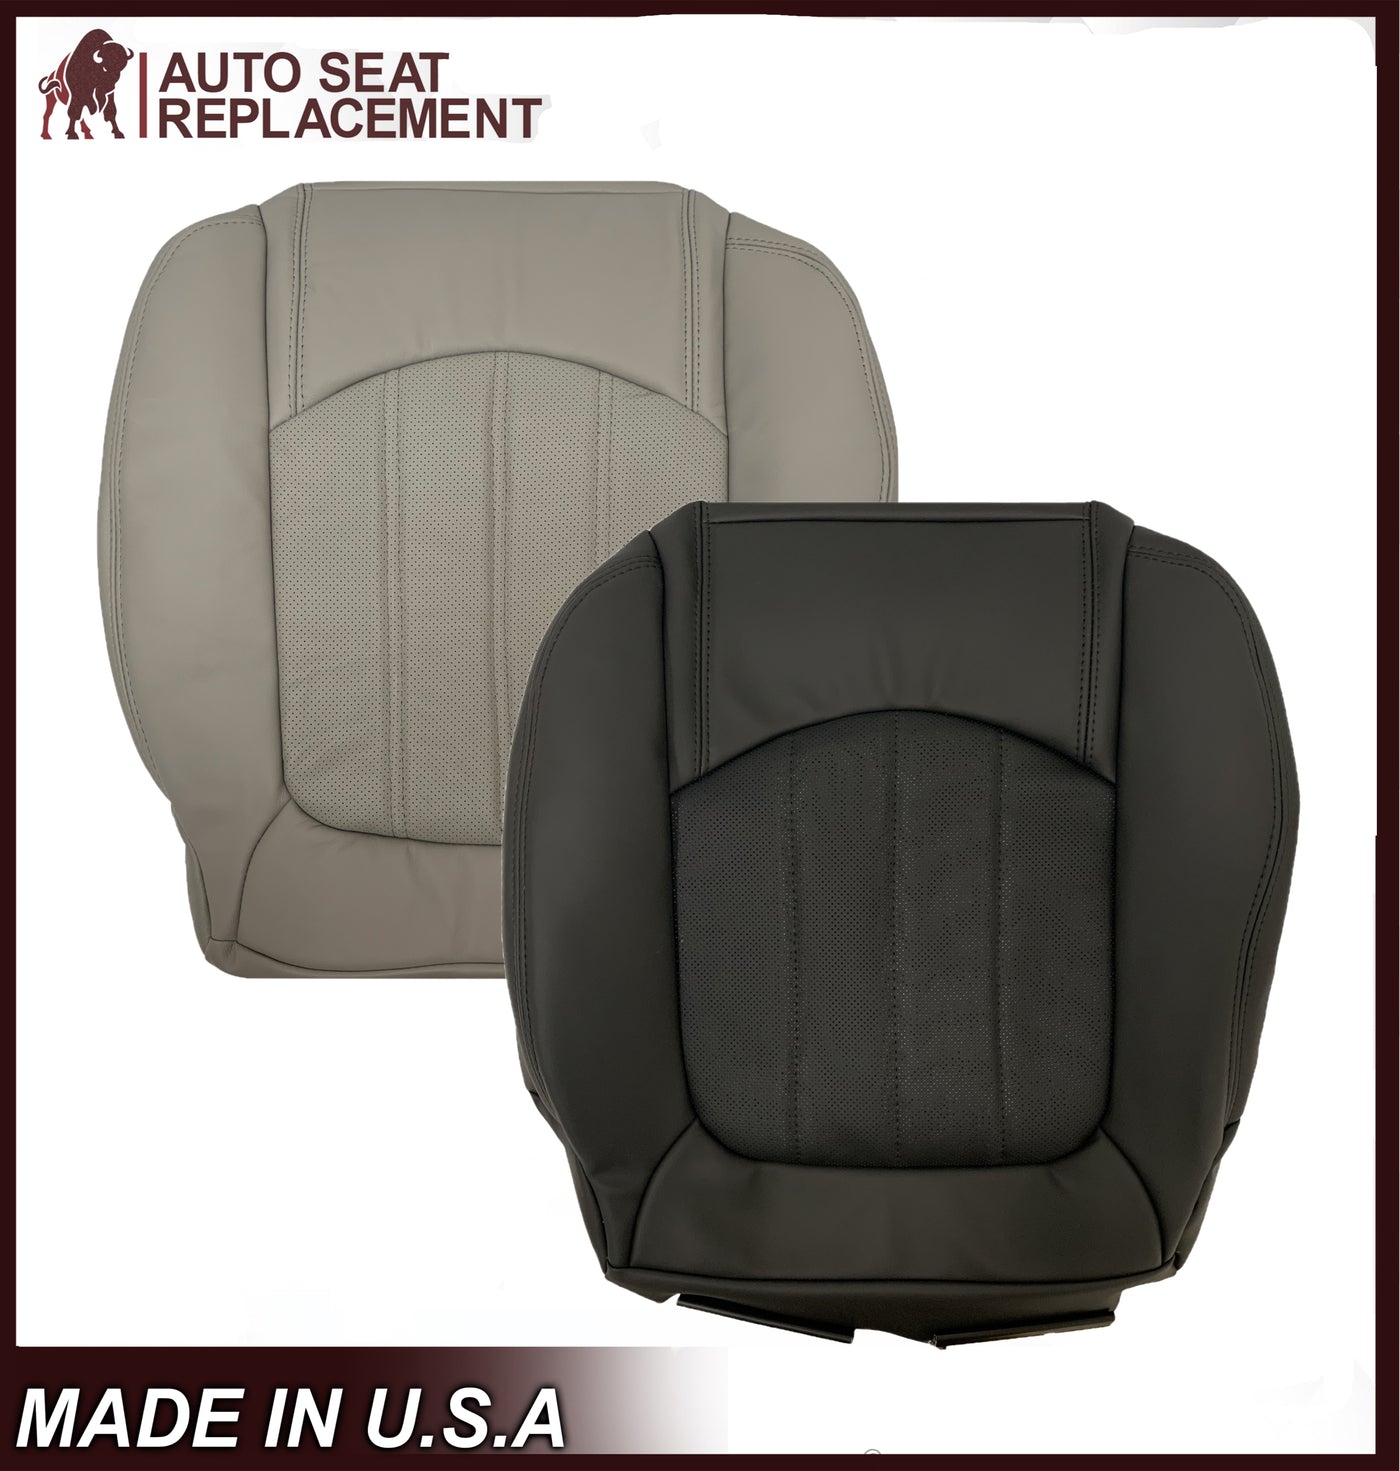 2008 - 2012 Buick Enclave Leather/ Vinyl Seat Covers in Gray/Black/Tan